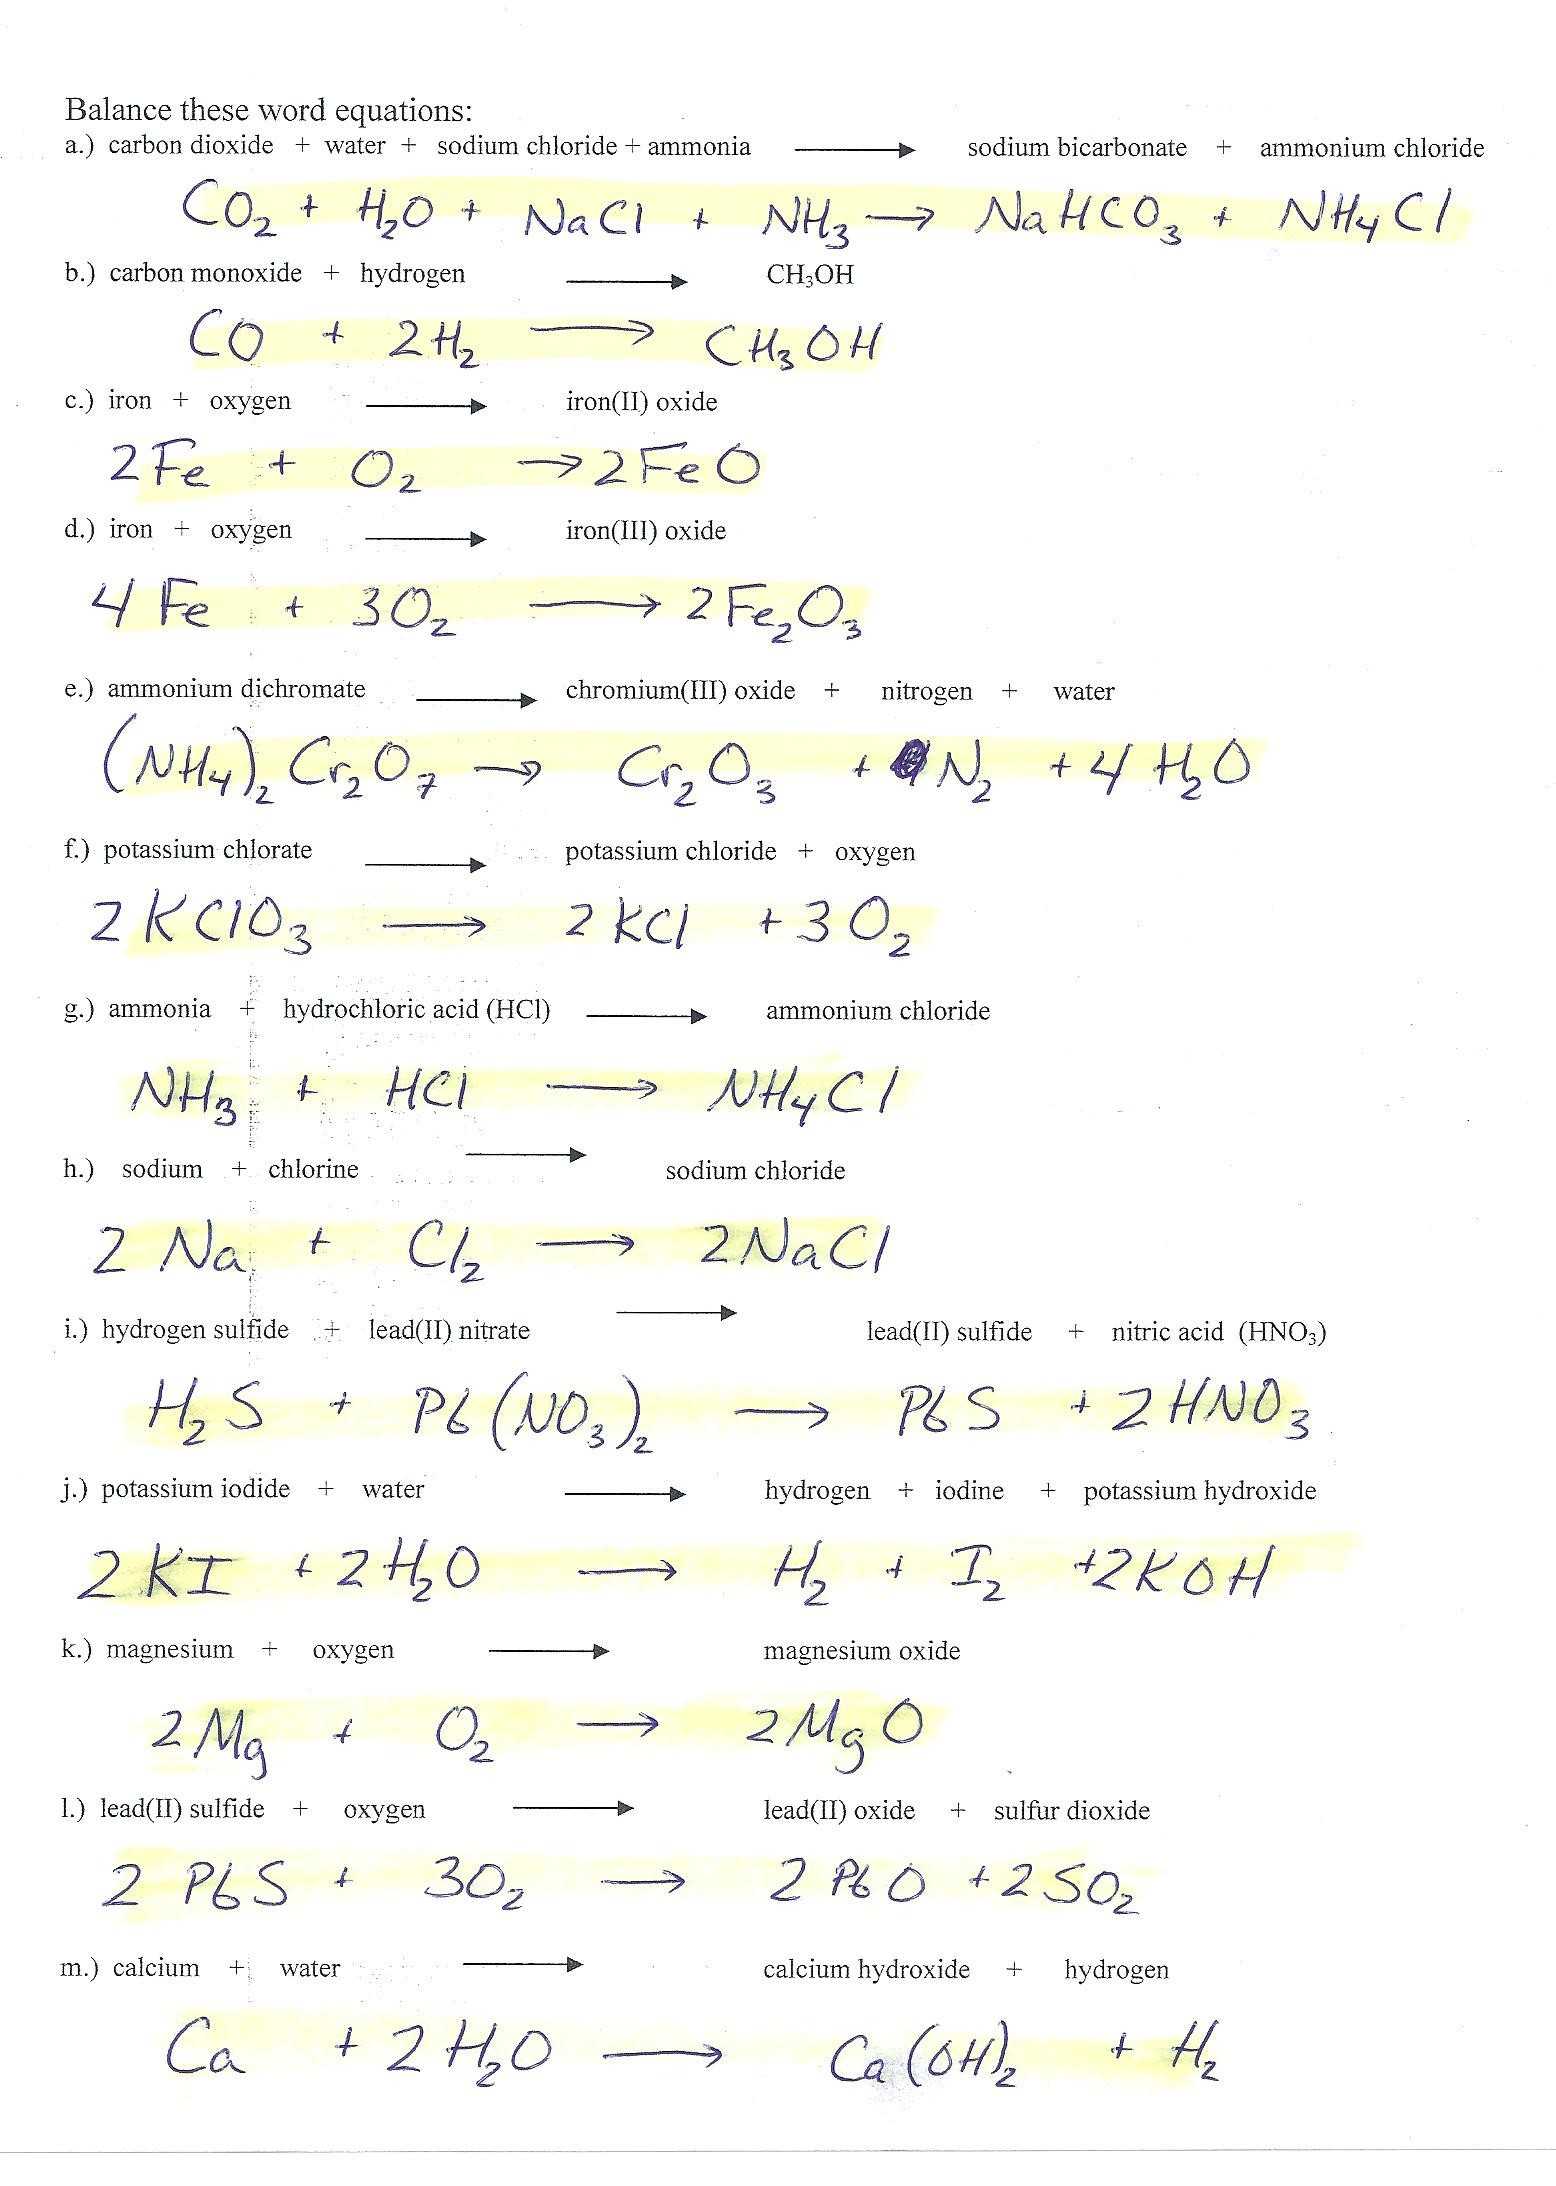 Energy Transformation Worksheet Answers with Reading thermometers Worksheet Answers Inspirationa Chemistry